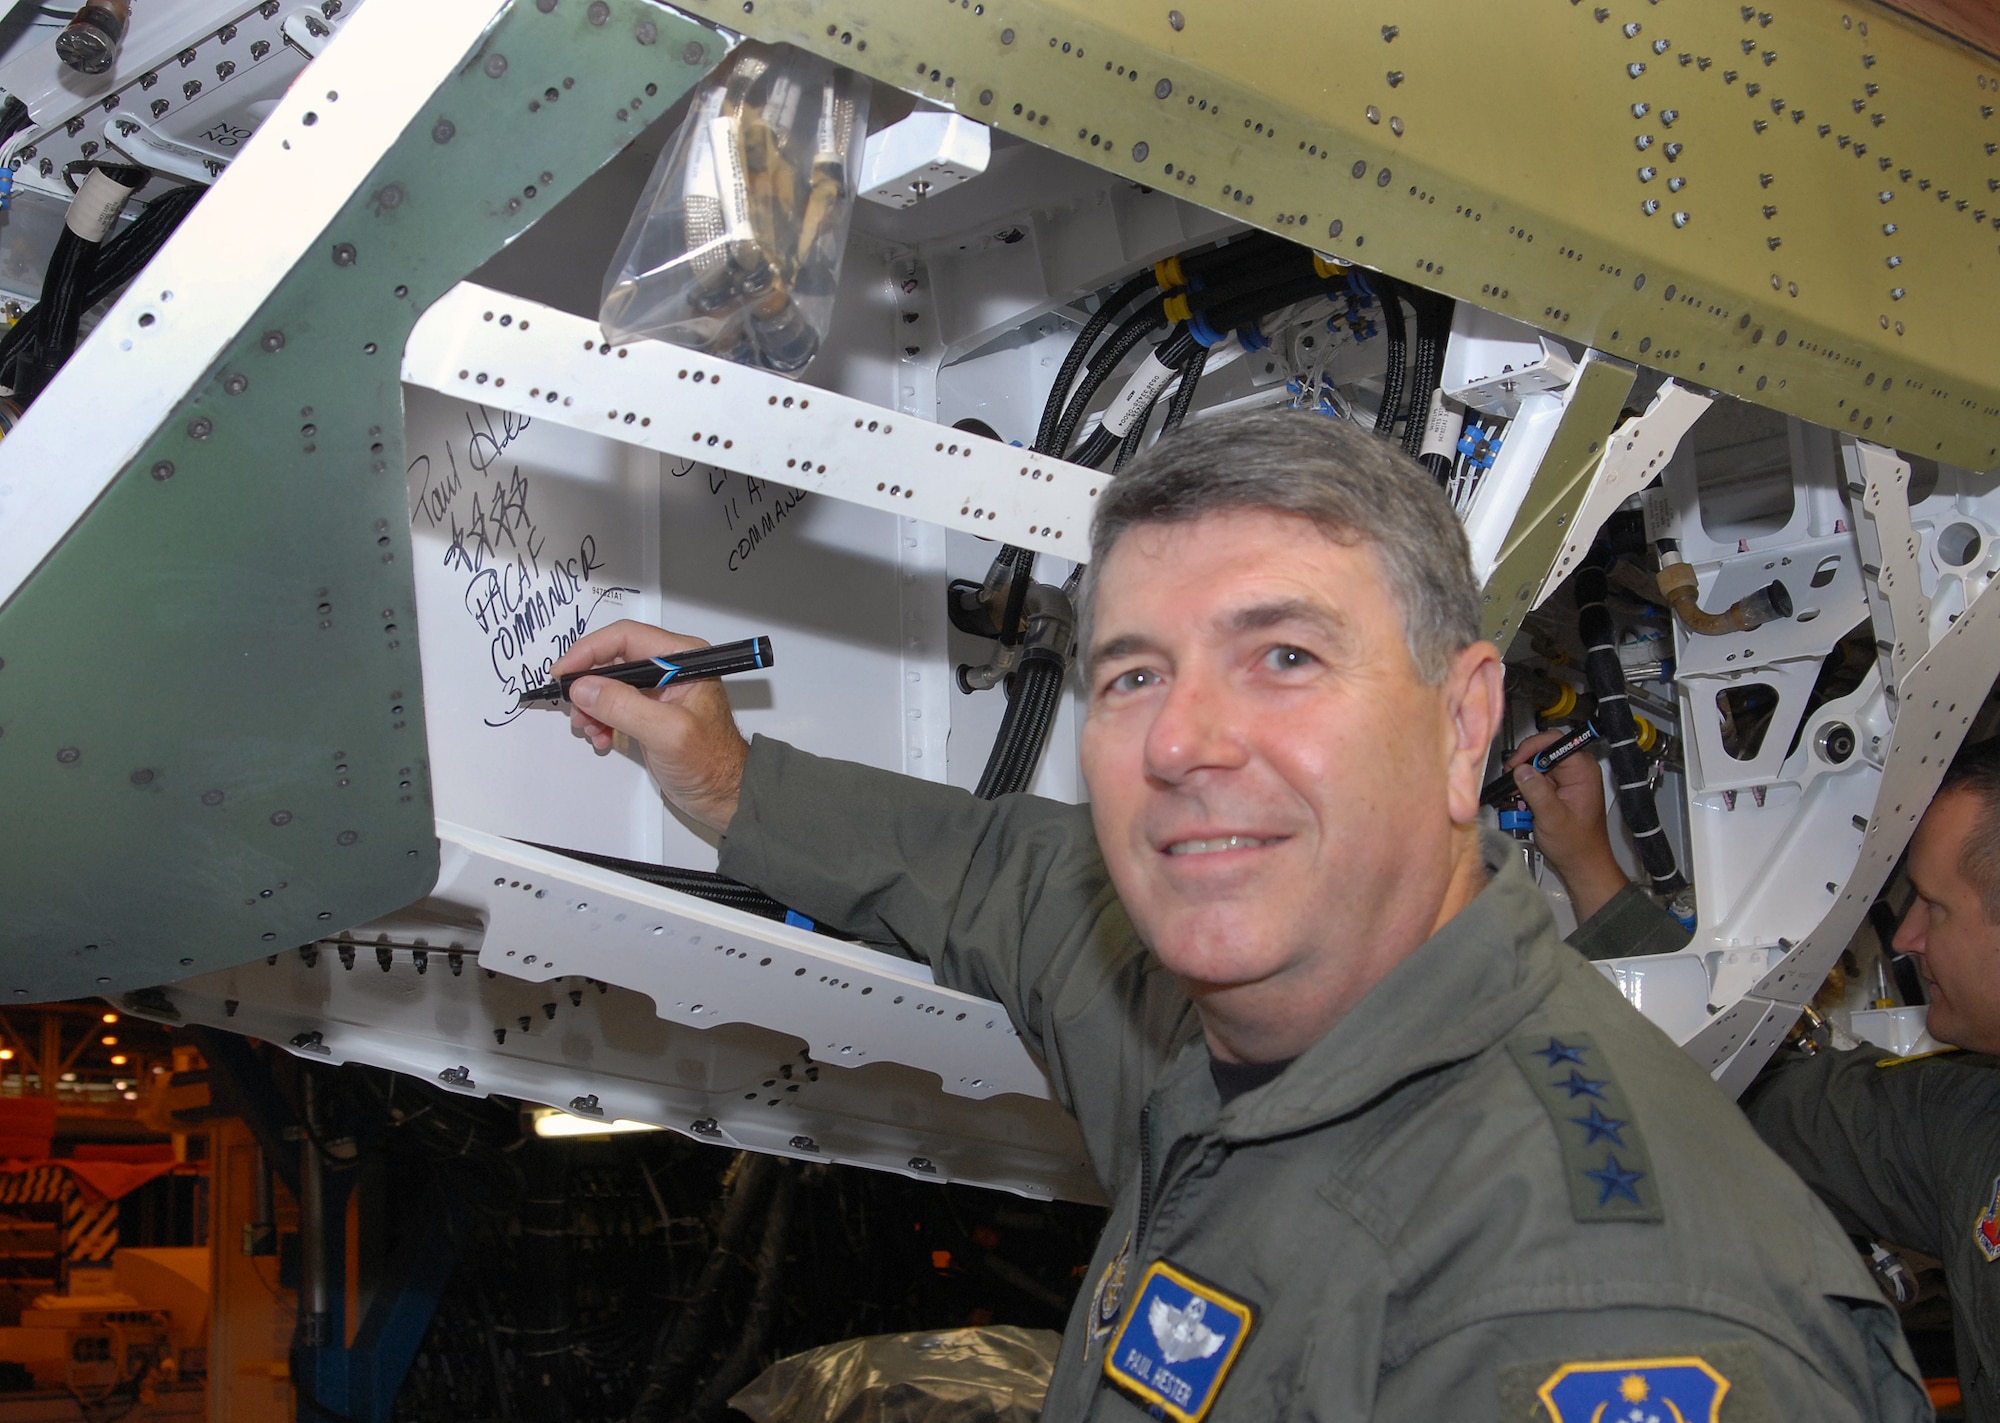 Gen. Paul Hester, Pacific Air Forces commander, signs the tail section of an F-22 Raptor being assigned to PACAF during an unveiling ceremony Aug 3 at the Lockheed Plant in Marietta, Ga.  The aircraft, which is still under construction, will be the first of 36 F-22s assigned to Elmendorf Air Force Base, Alaska, beginning next year.  (Courtesy photo/John Rossino)